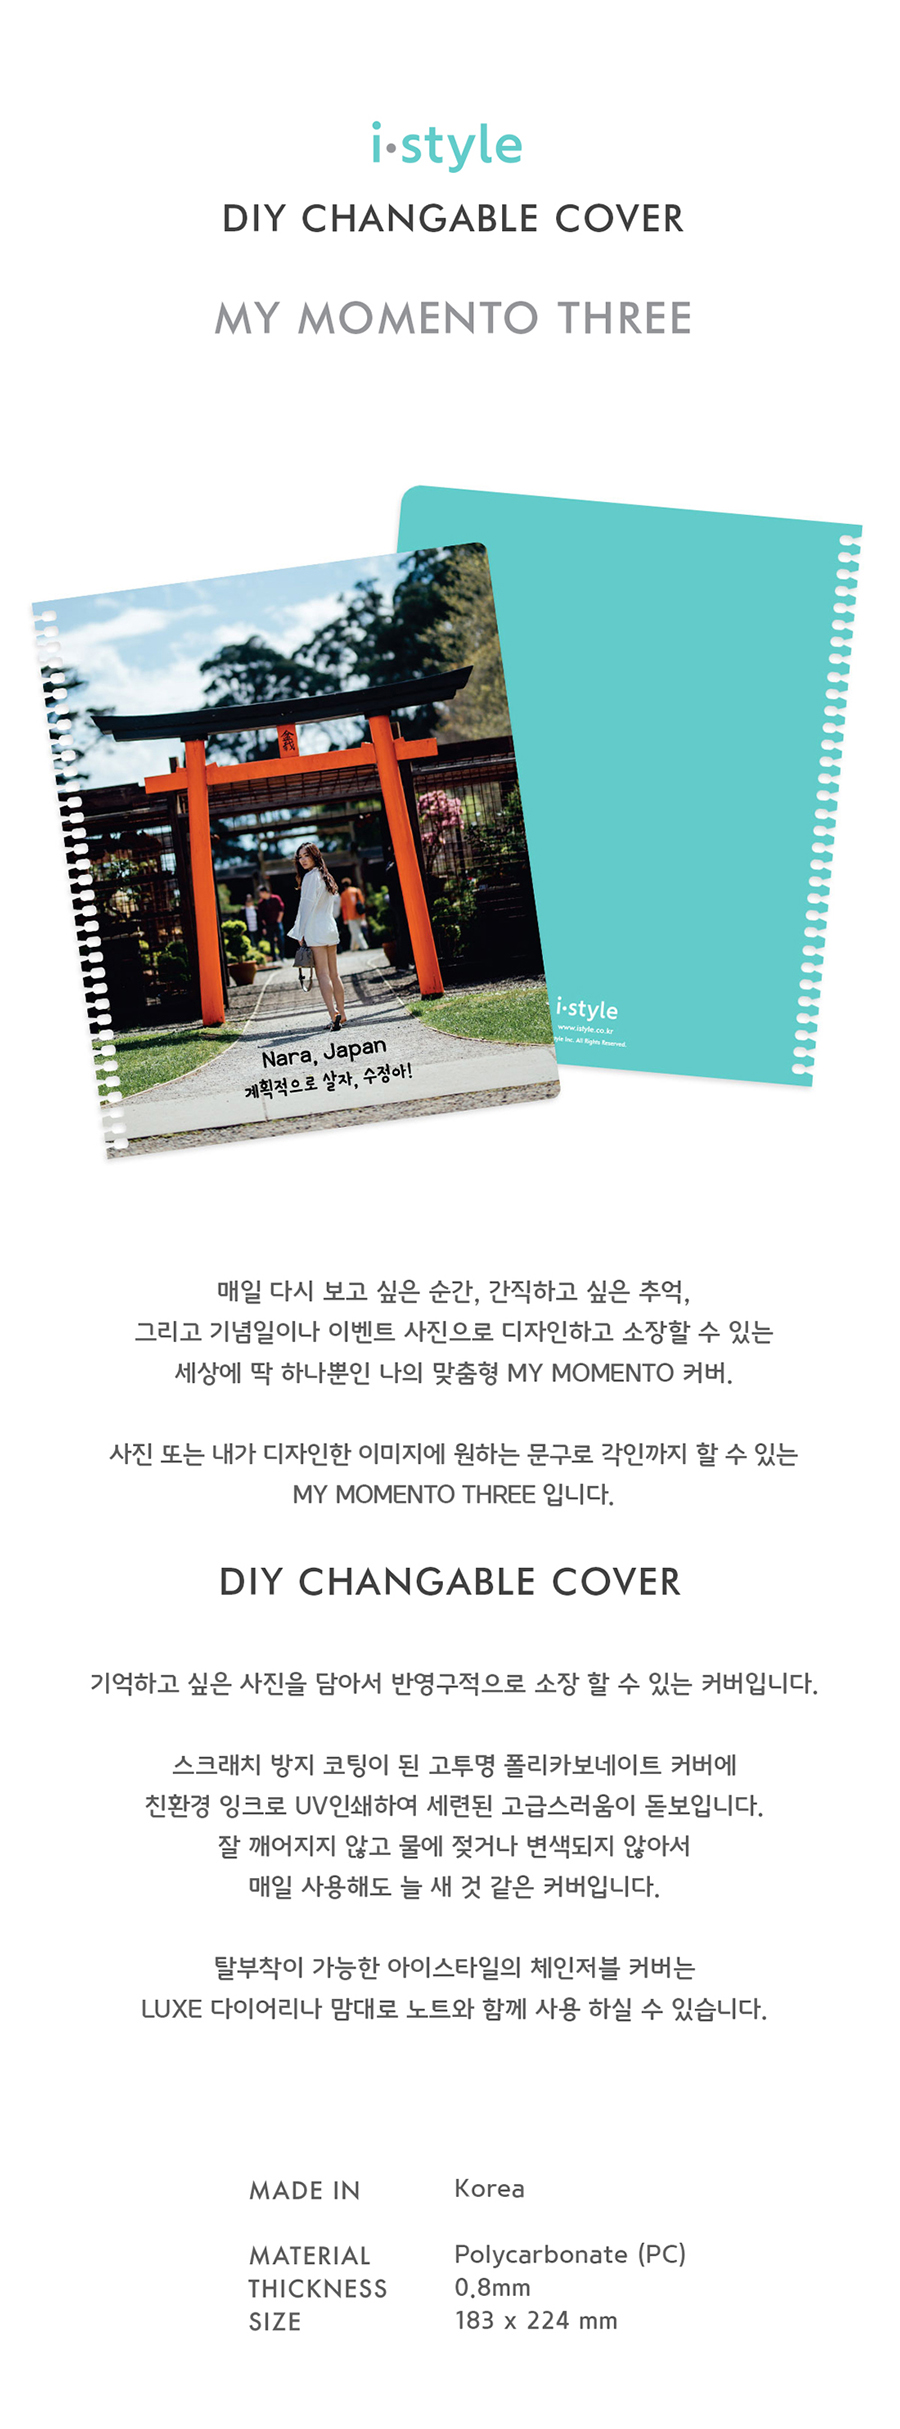 [MyMomento]ChangeableCoverOnlyDetails(Three)V2_153821.jpg